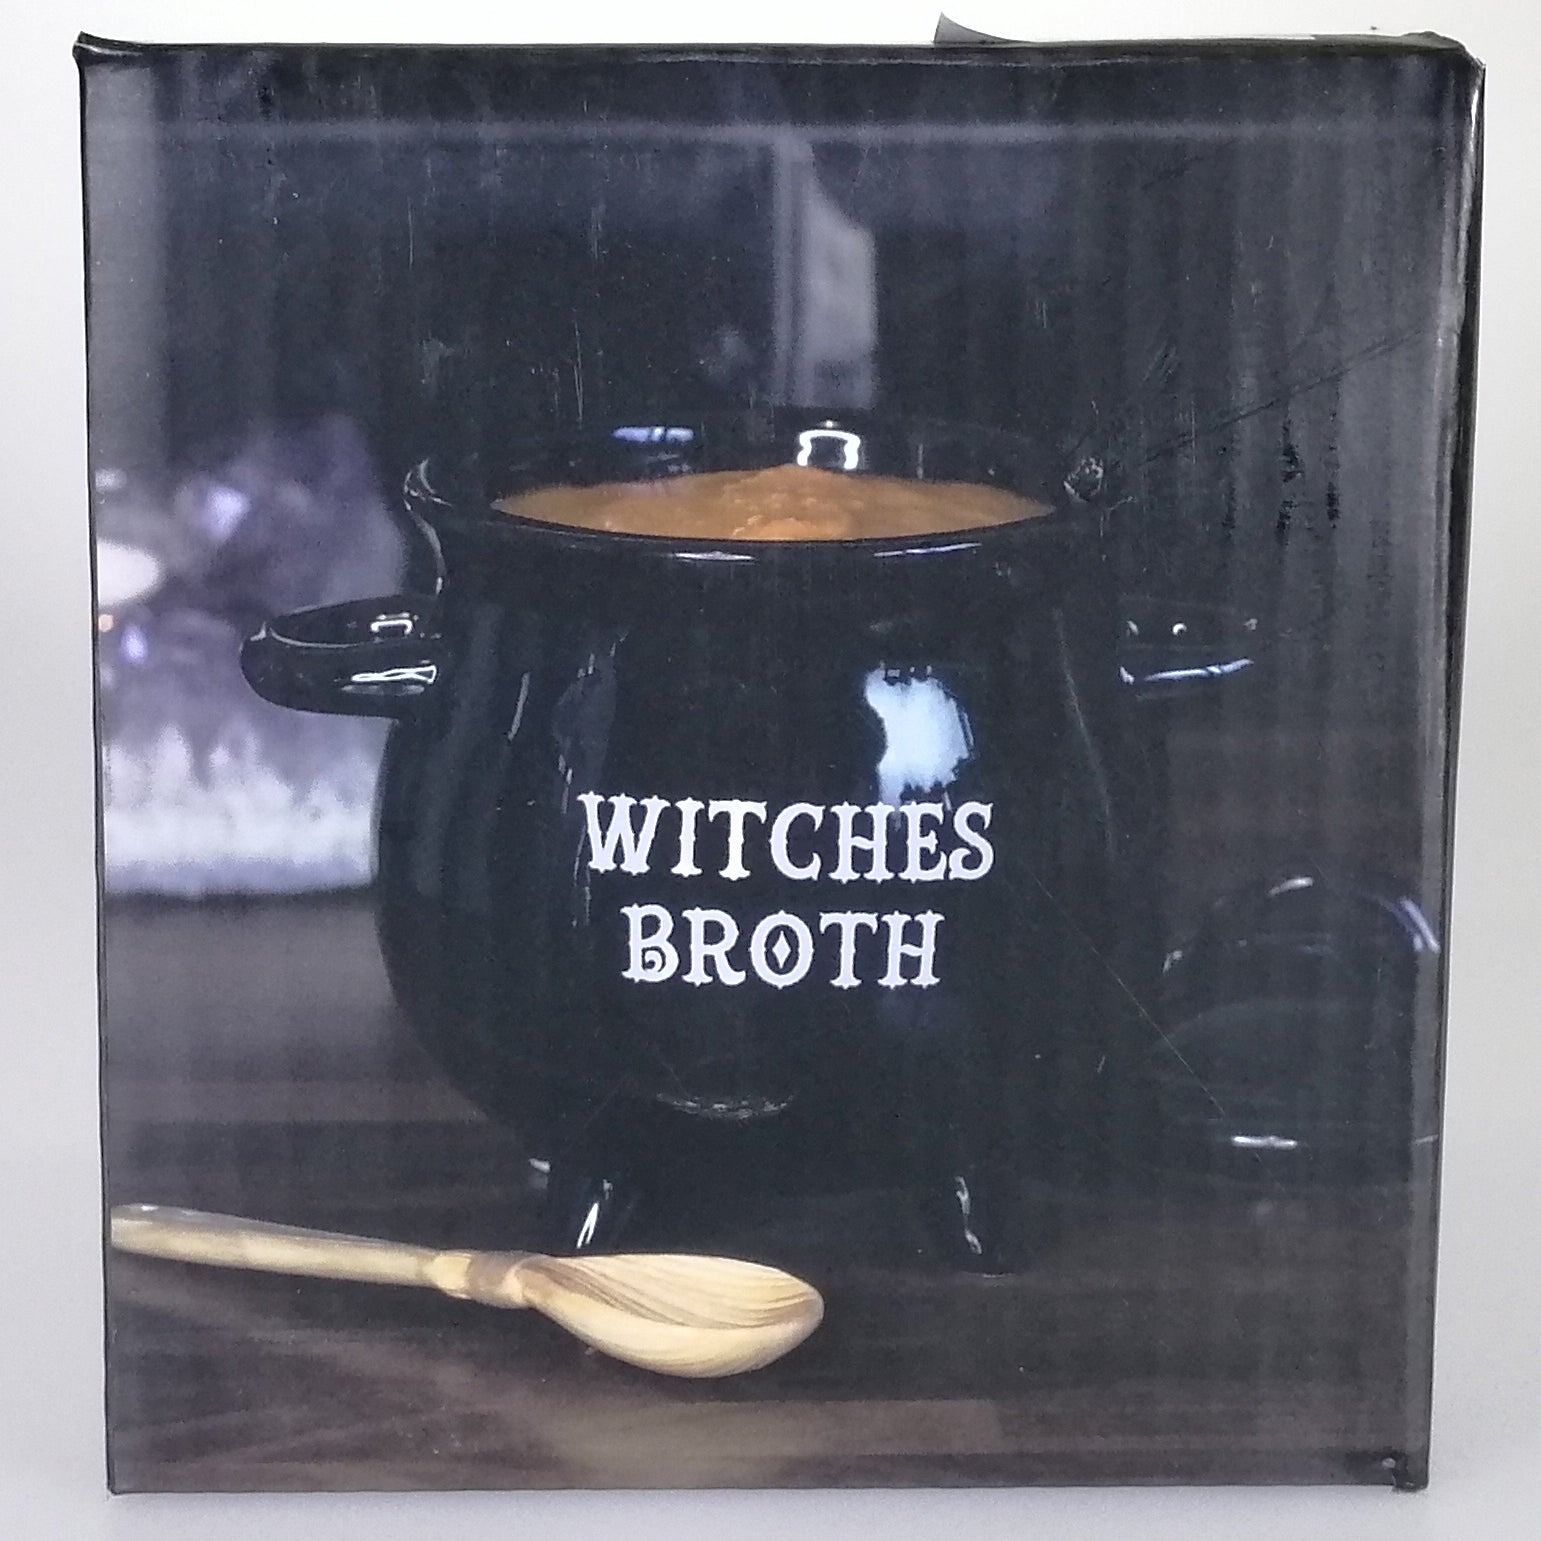 Witches Broth' - Cauldron Soup Bowl